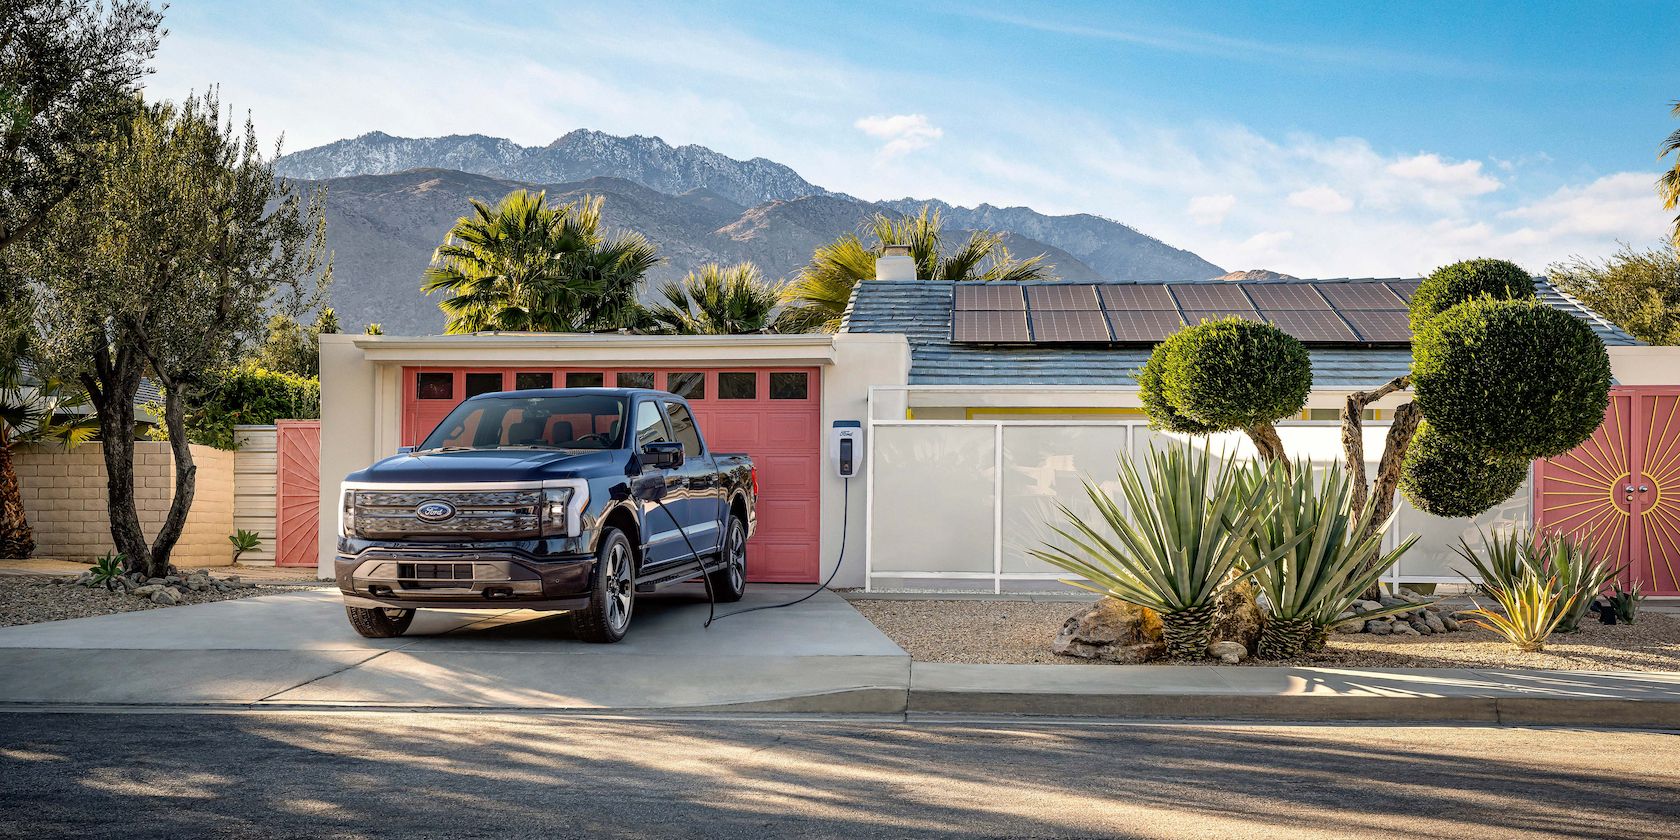 F-150 Lightning attached to a house with solar panels.